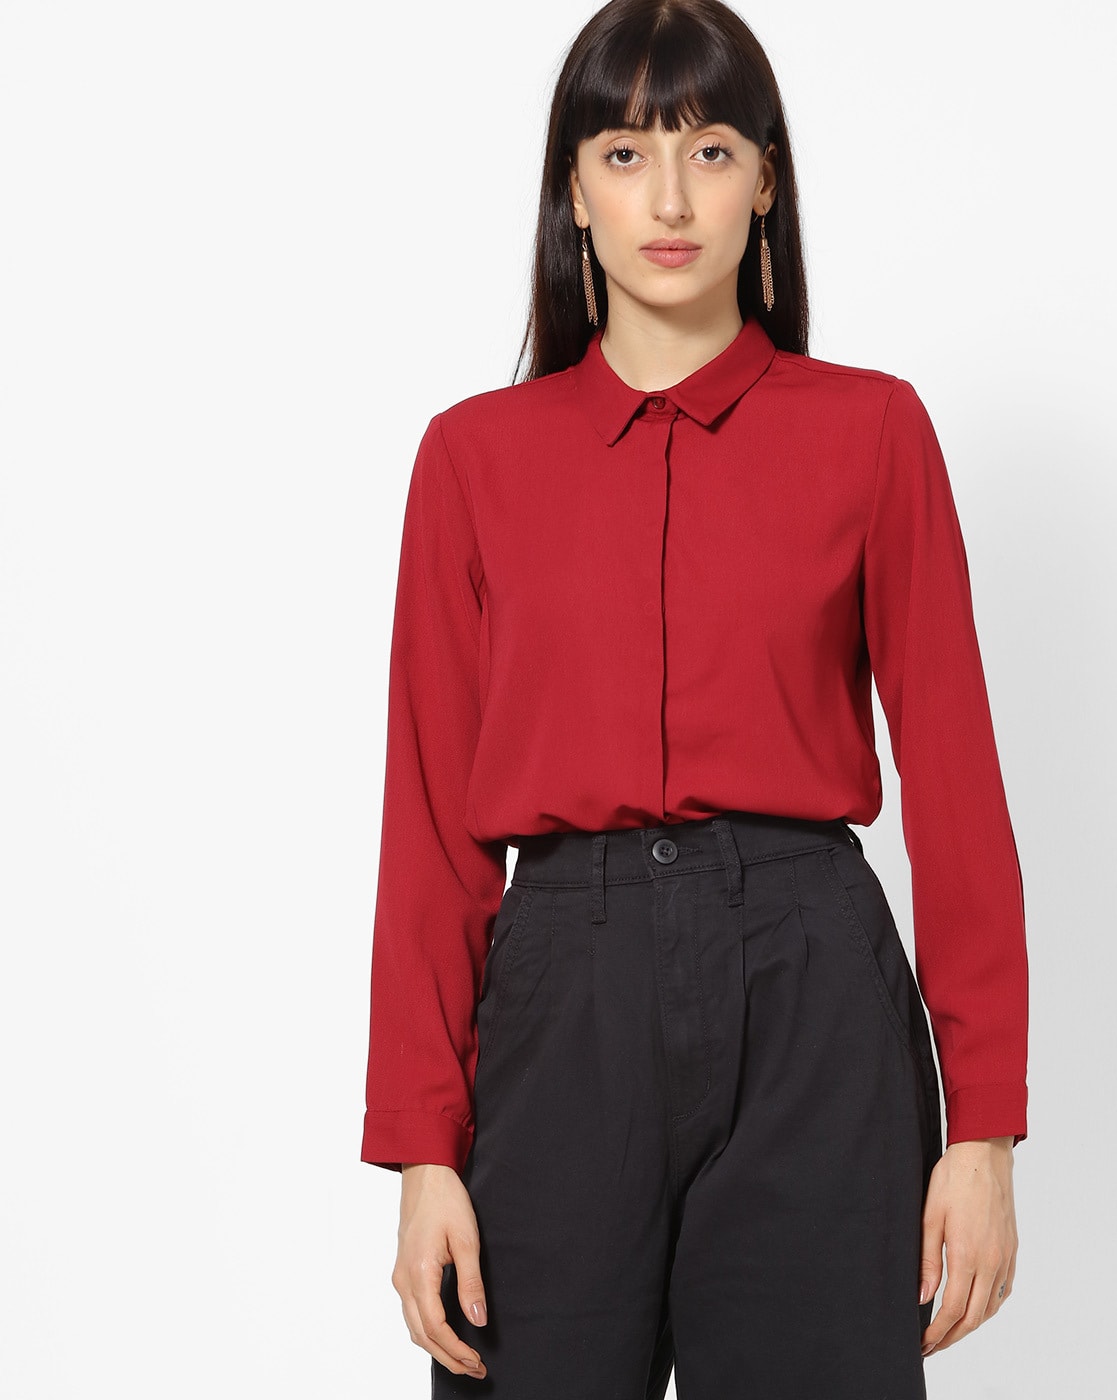 Buy Red Shirts for Men by PARK AVENUE Online | Ajio.com